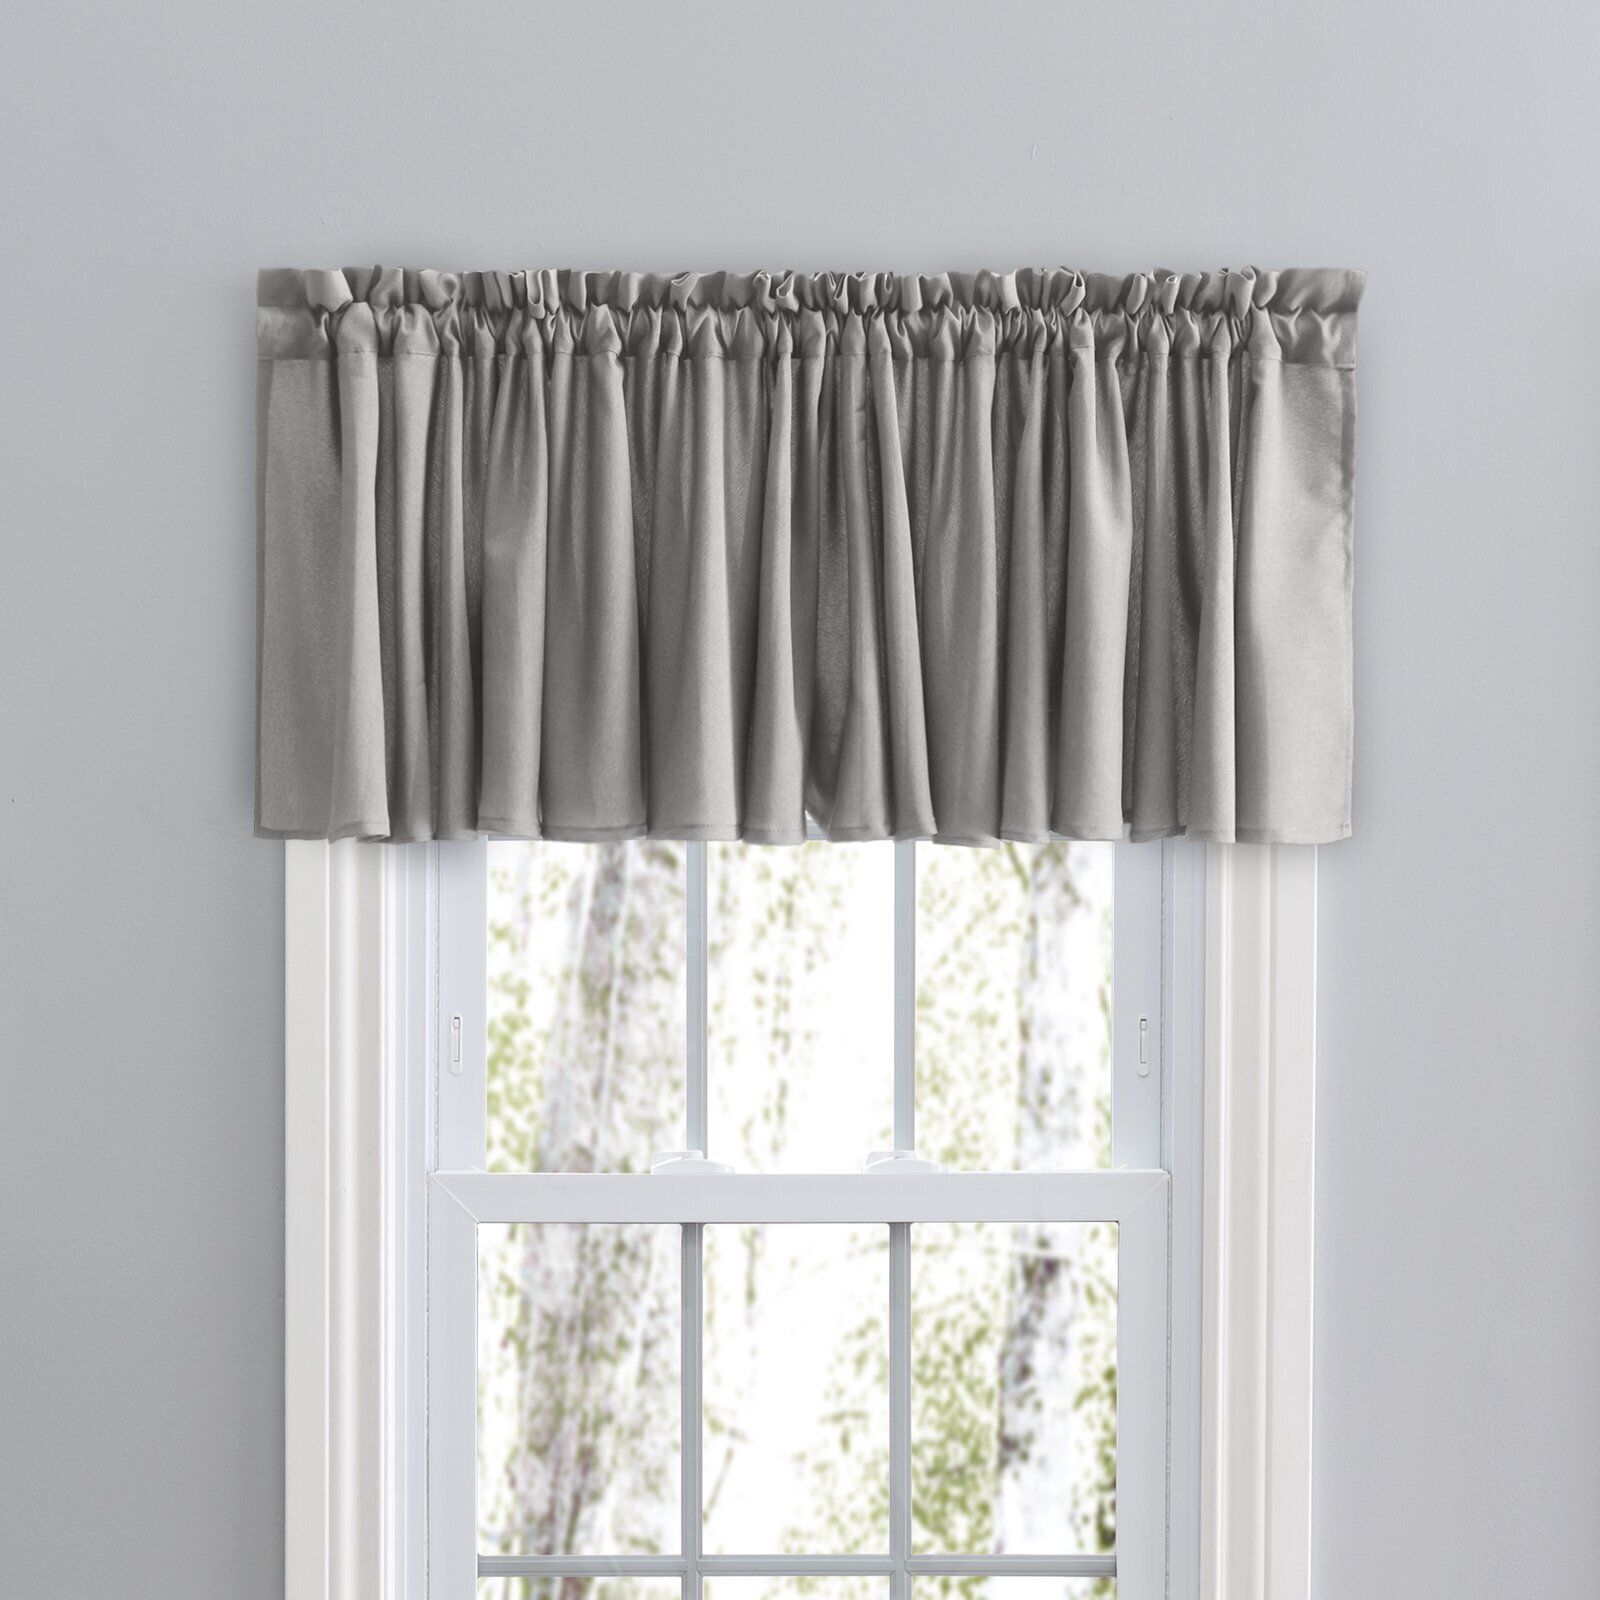 Classic Tailored Grey Valances For Large Windows 